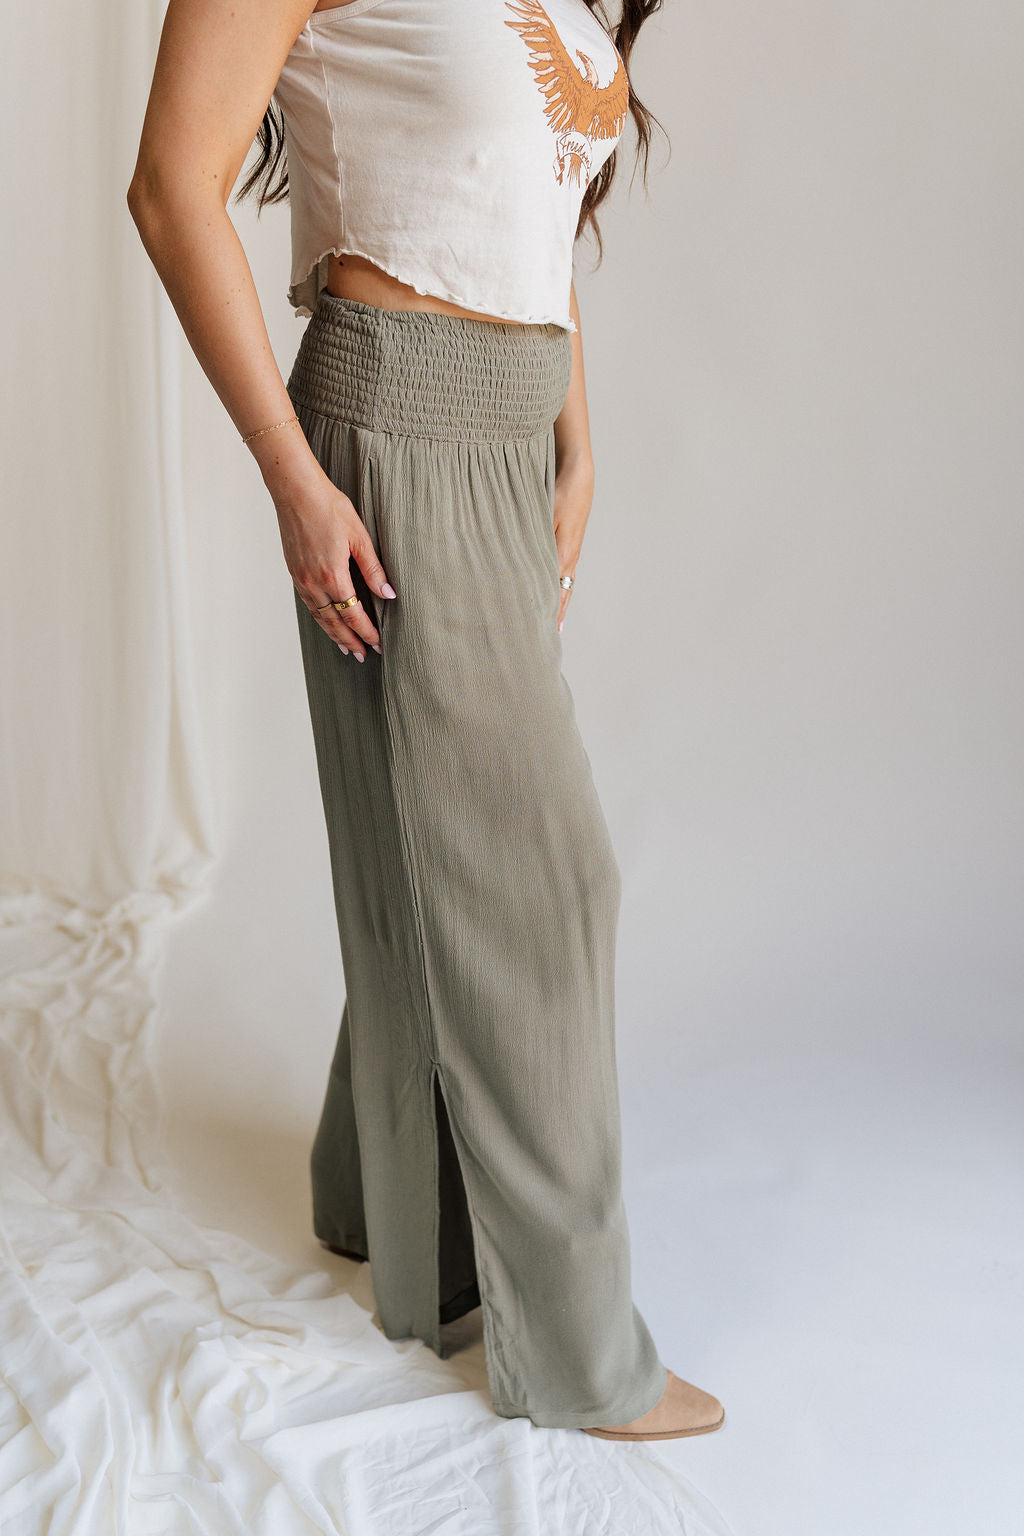 Lower body side  view of female model wearing the Audrey Olive Green Wide Leg Pants that have olive green fabric, a smocked waist, wide legs, and side slits. Worn with beige tank top